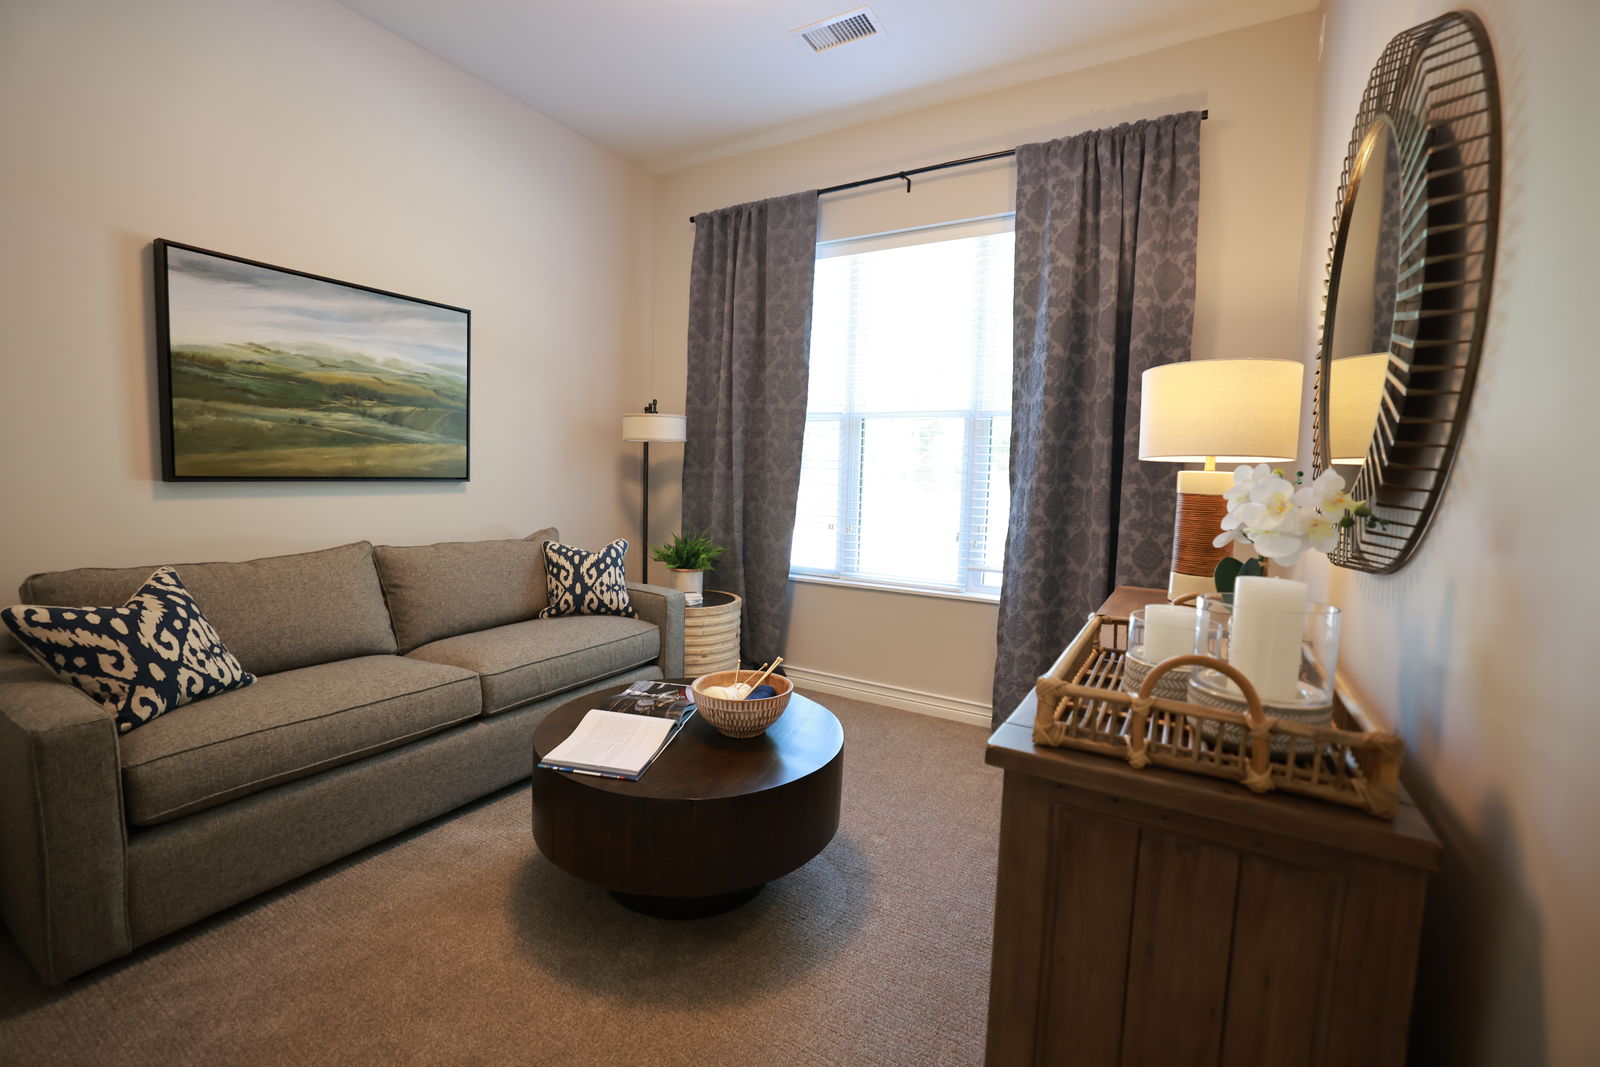 Apartment at VITALIA® Stow in Stow OH